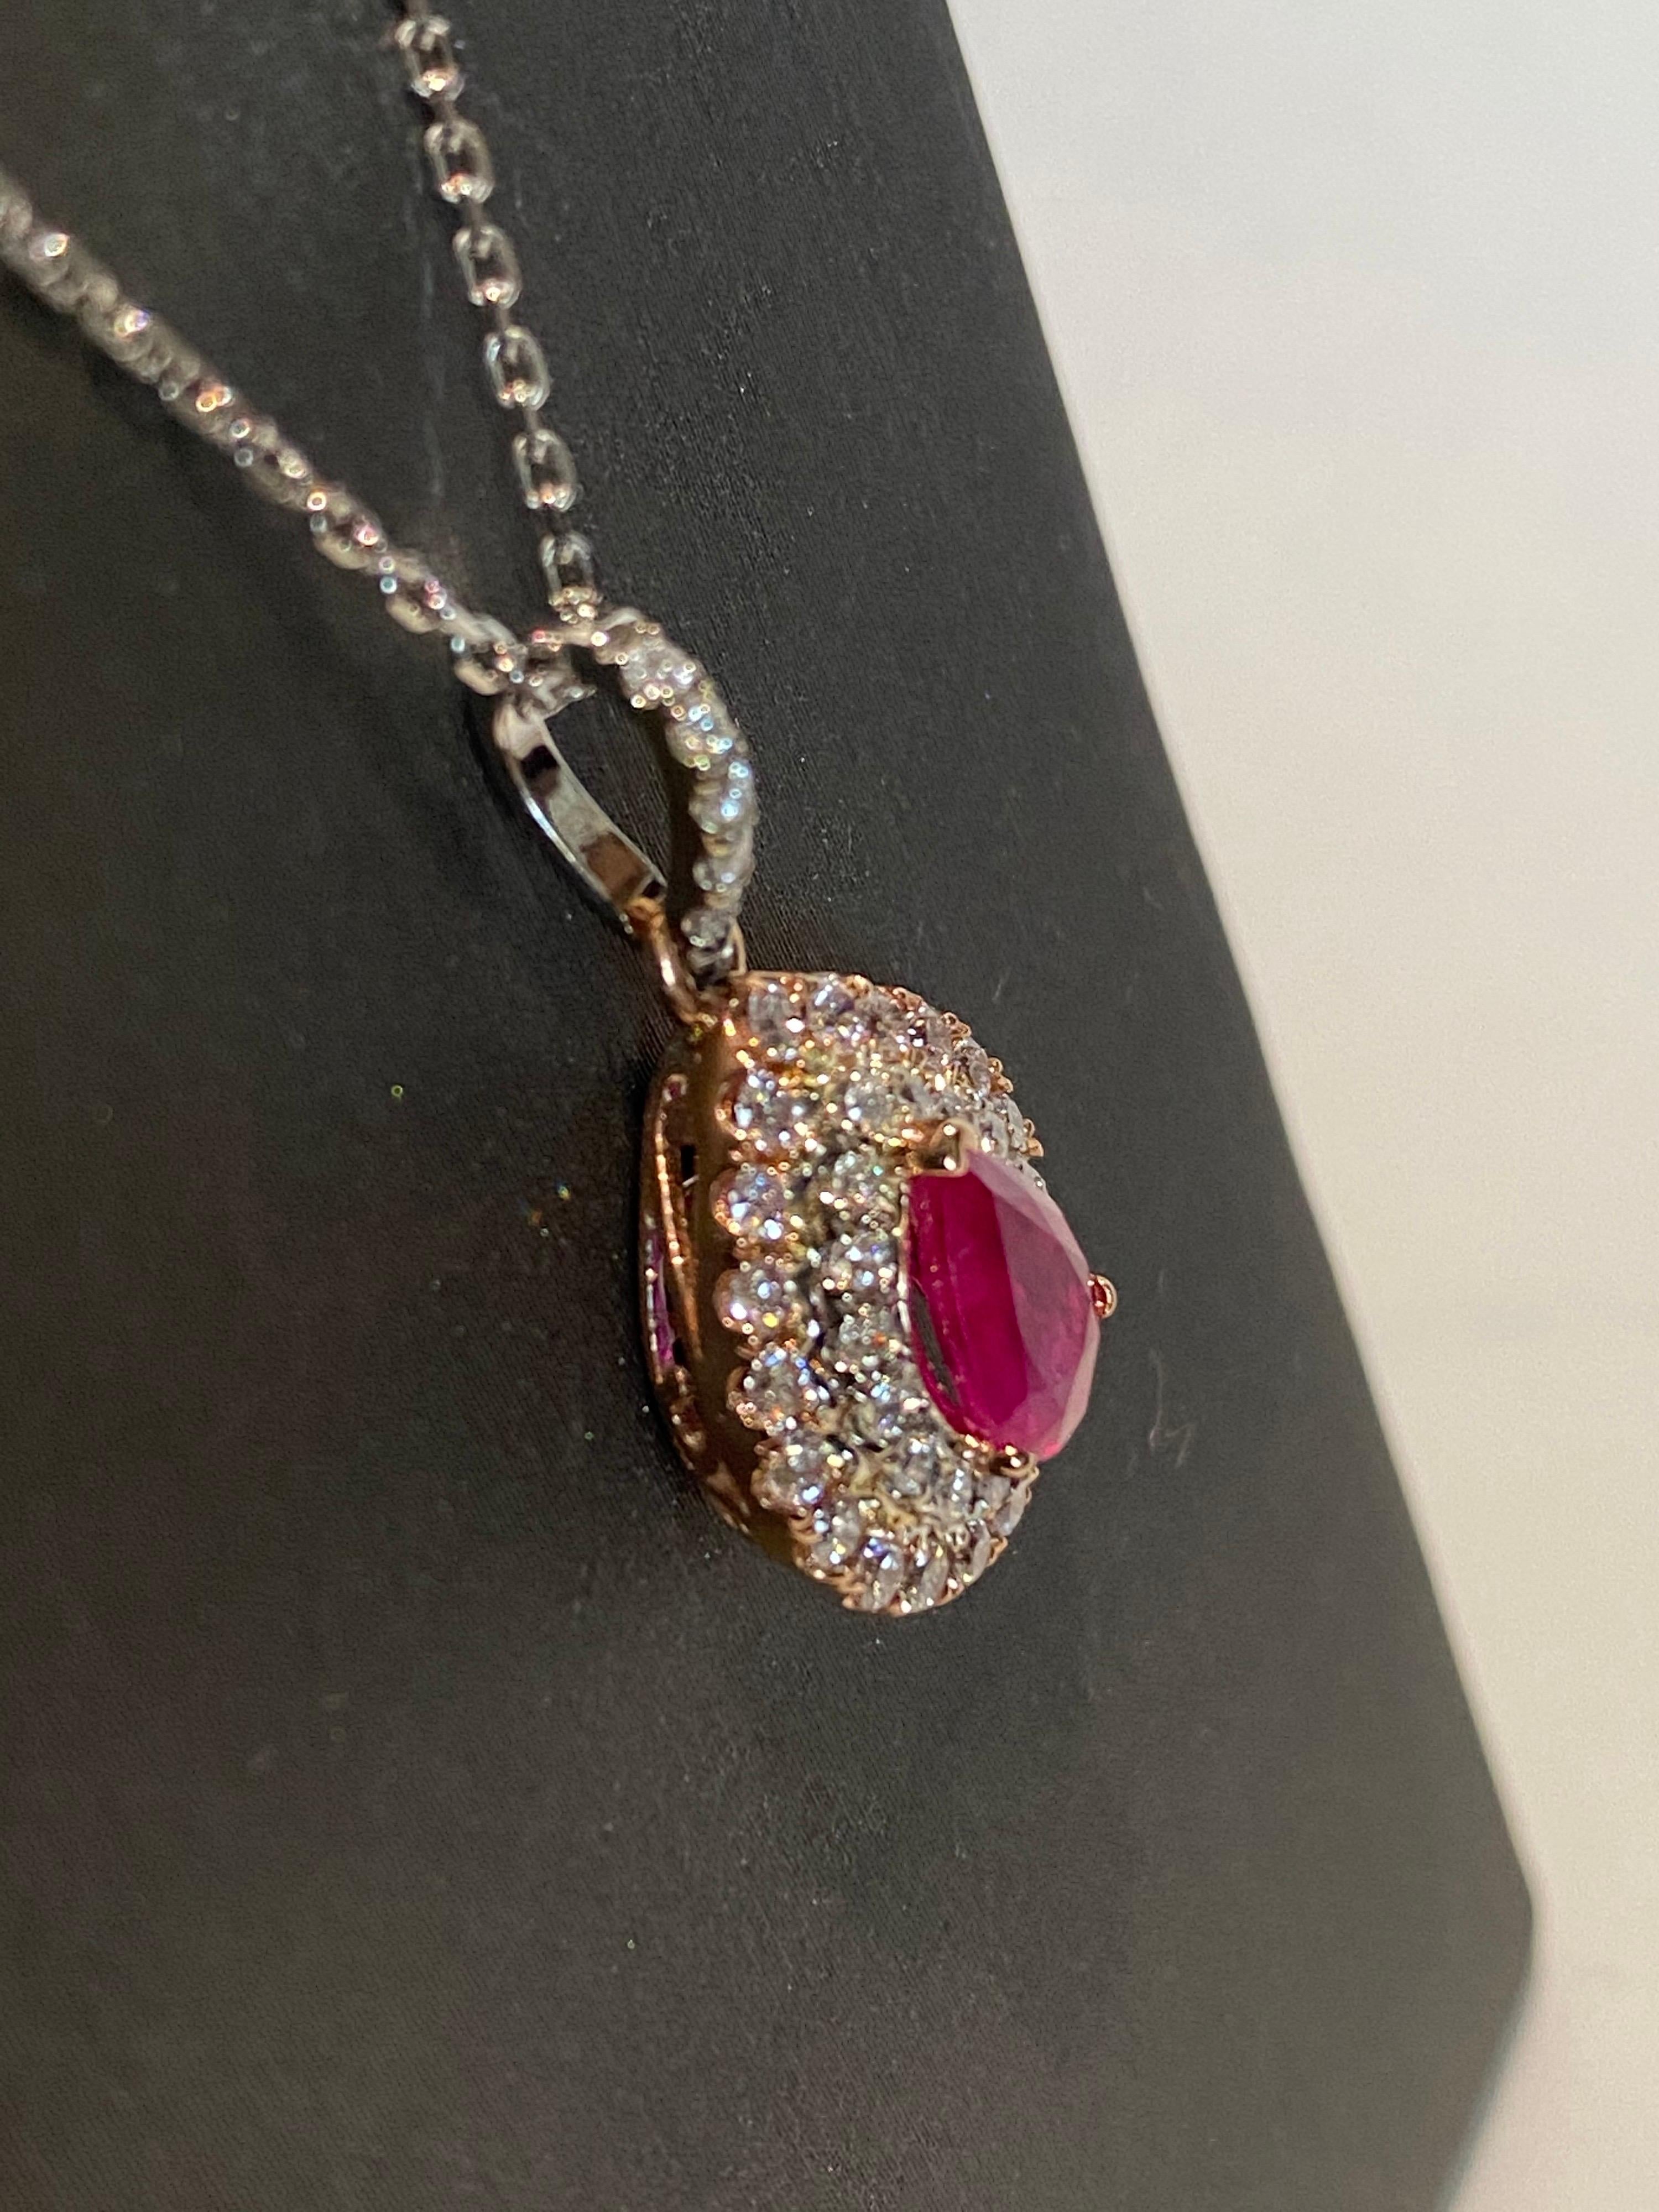 Pear shaped ruby has double halo of pink and white diamonds. Double halo makes the center stone stand out and look bigger. Set in two tone gold, a white gold chain is included. 
Ruby: 1.05ct
White Diamond: 0.23ct
Pink Diamond: 0.39ct
Two Tone Gold: